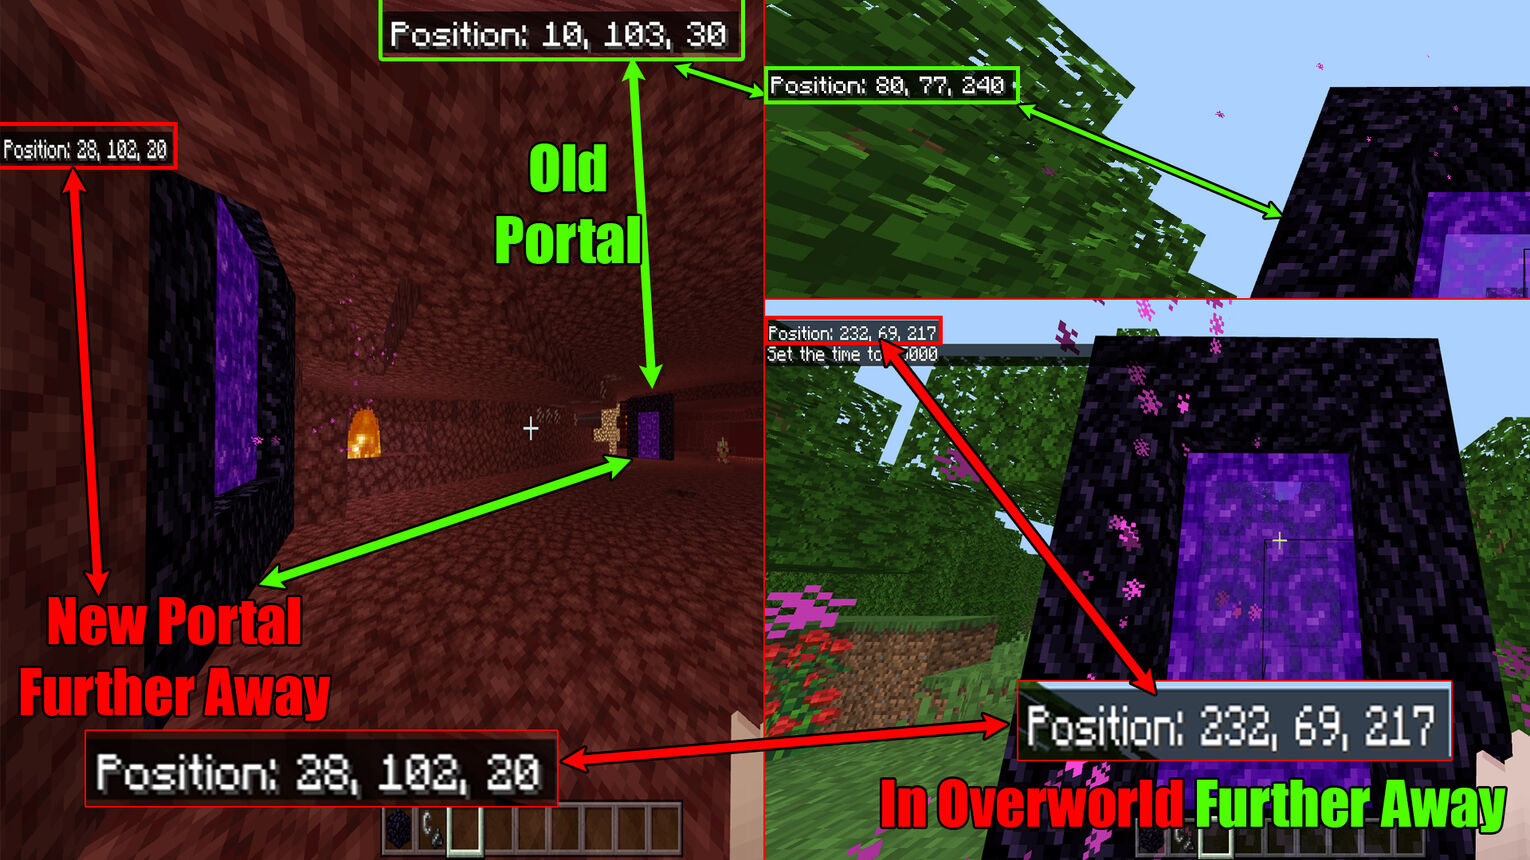 Minecraft How To Travel Faster With Nether Portals Bfac2ef581d5bb9296904d0482d7c77f 